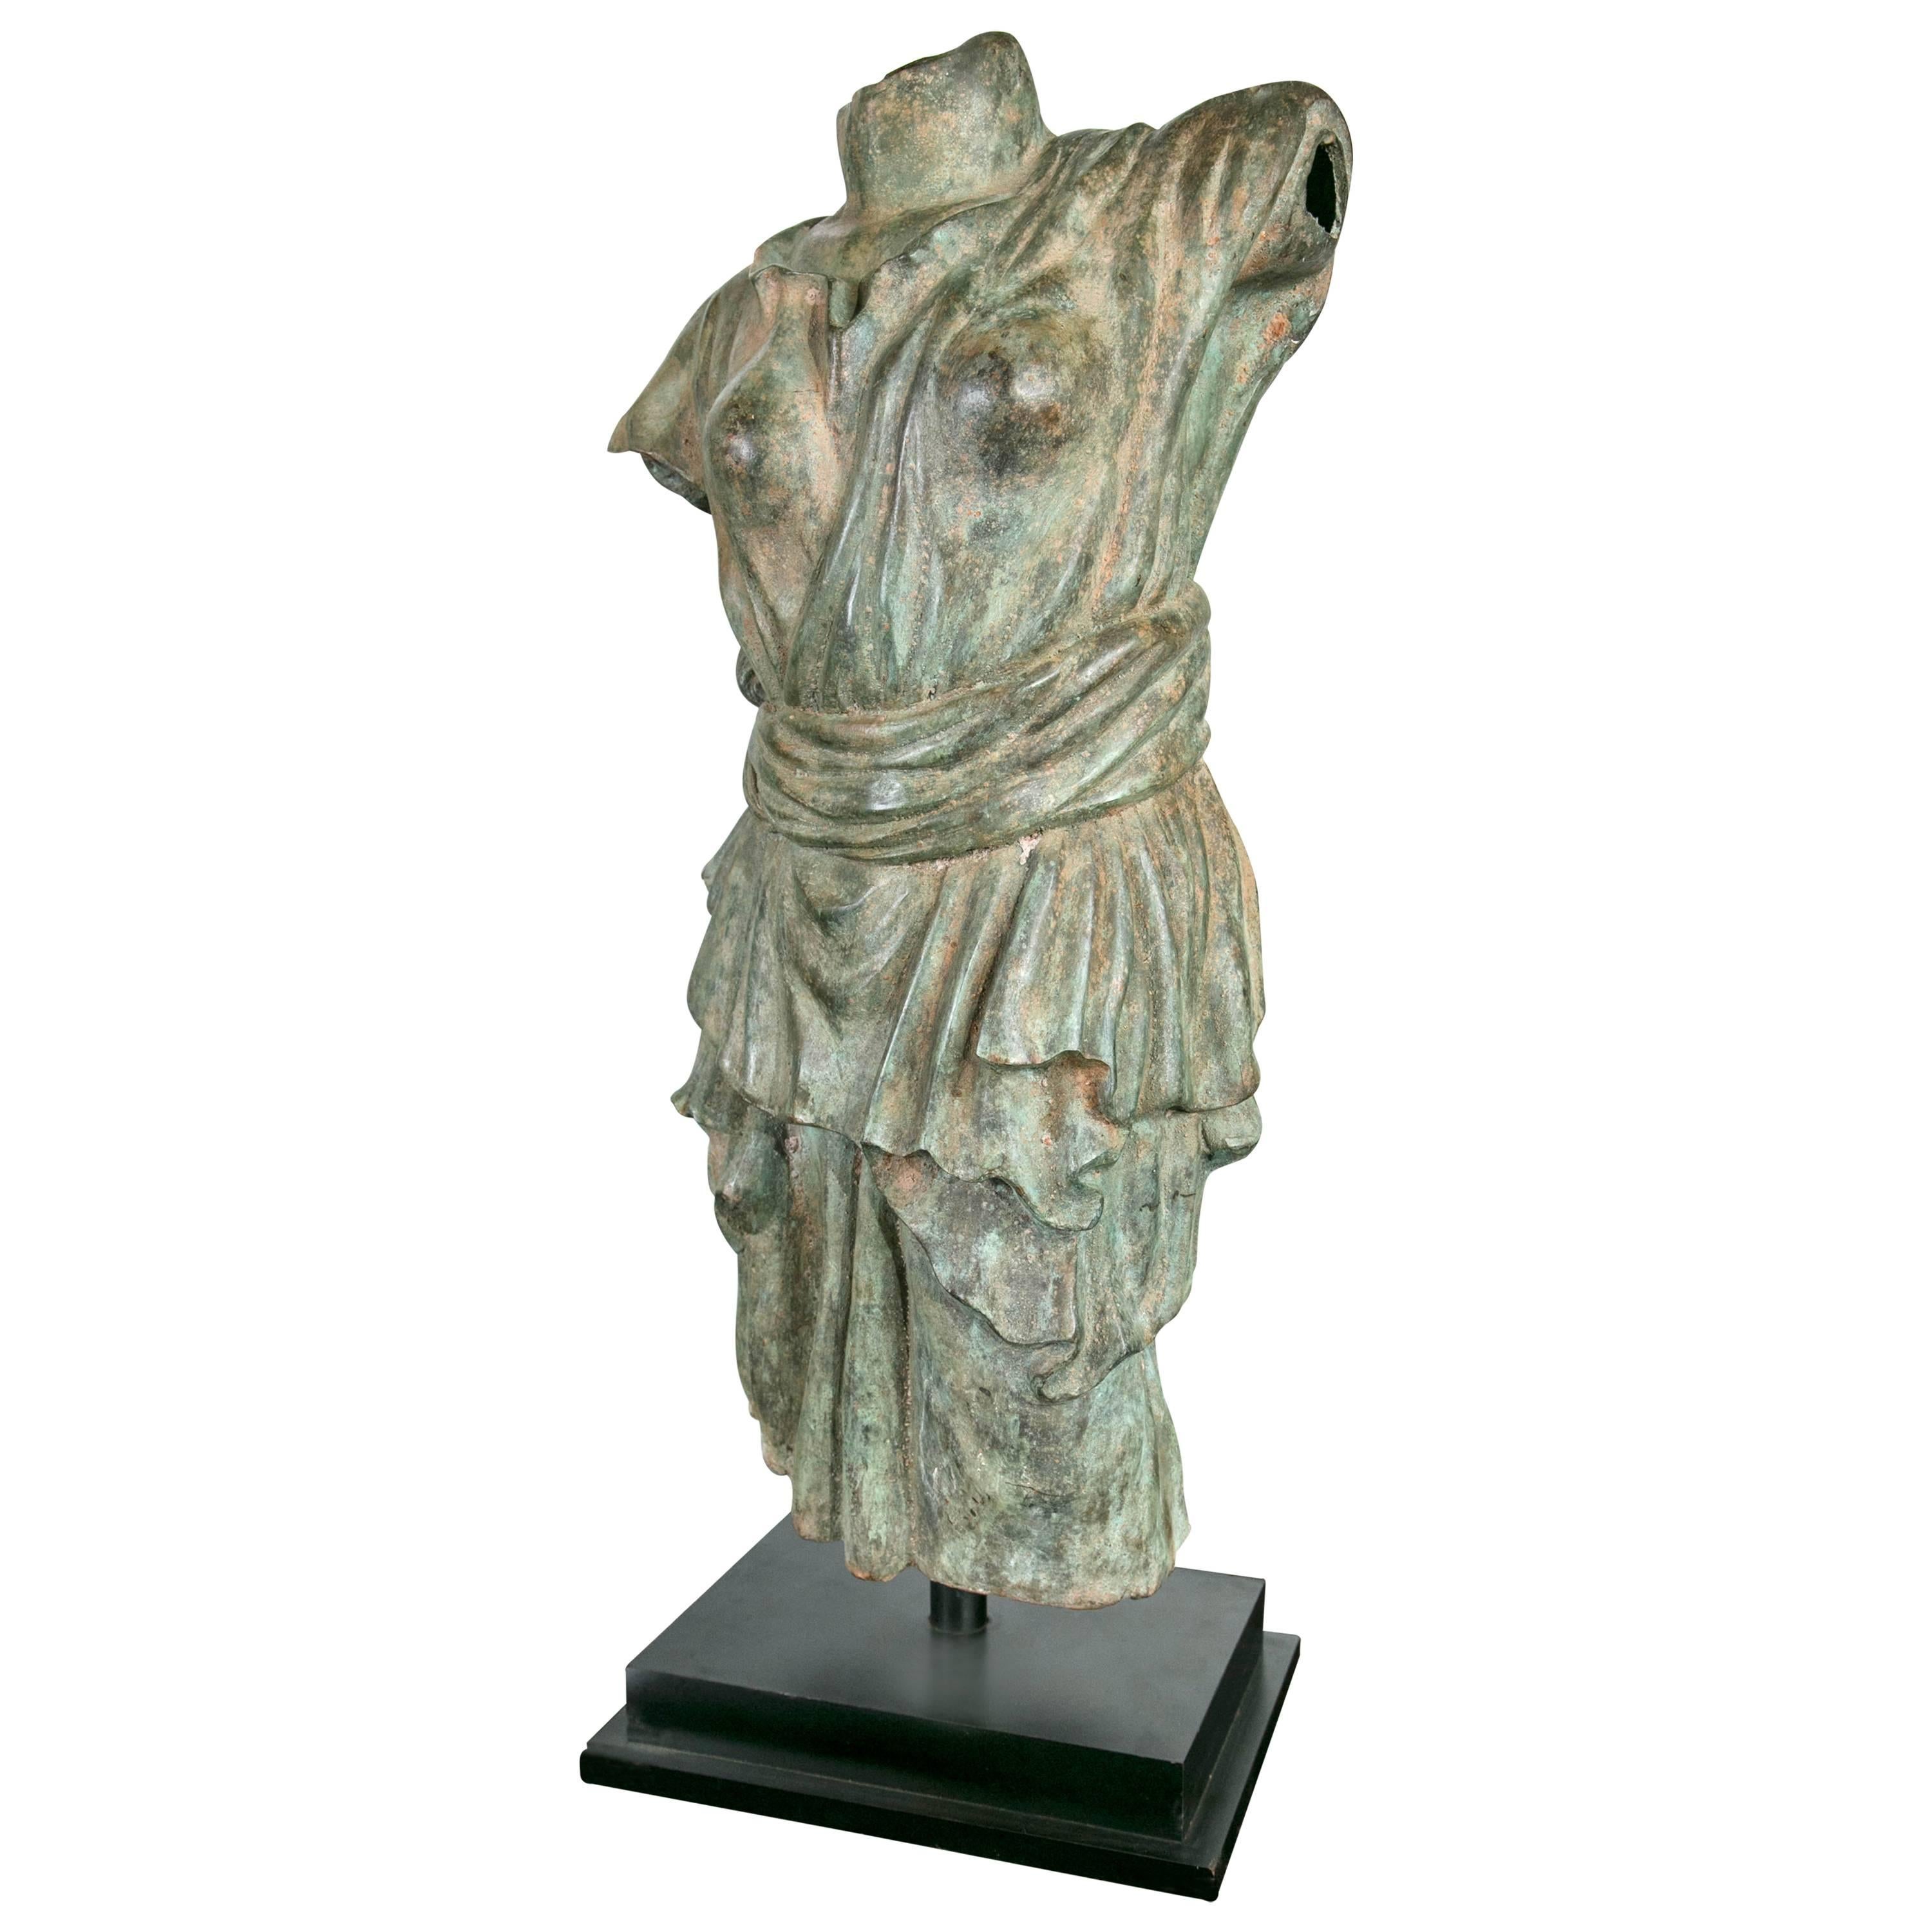 Draped Female Torso in Bronze, after the Antique